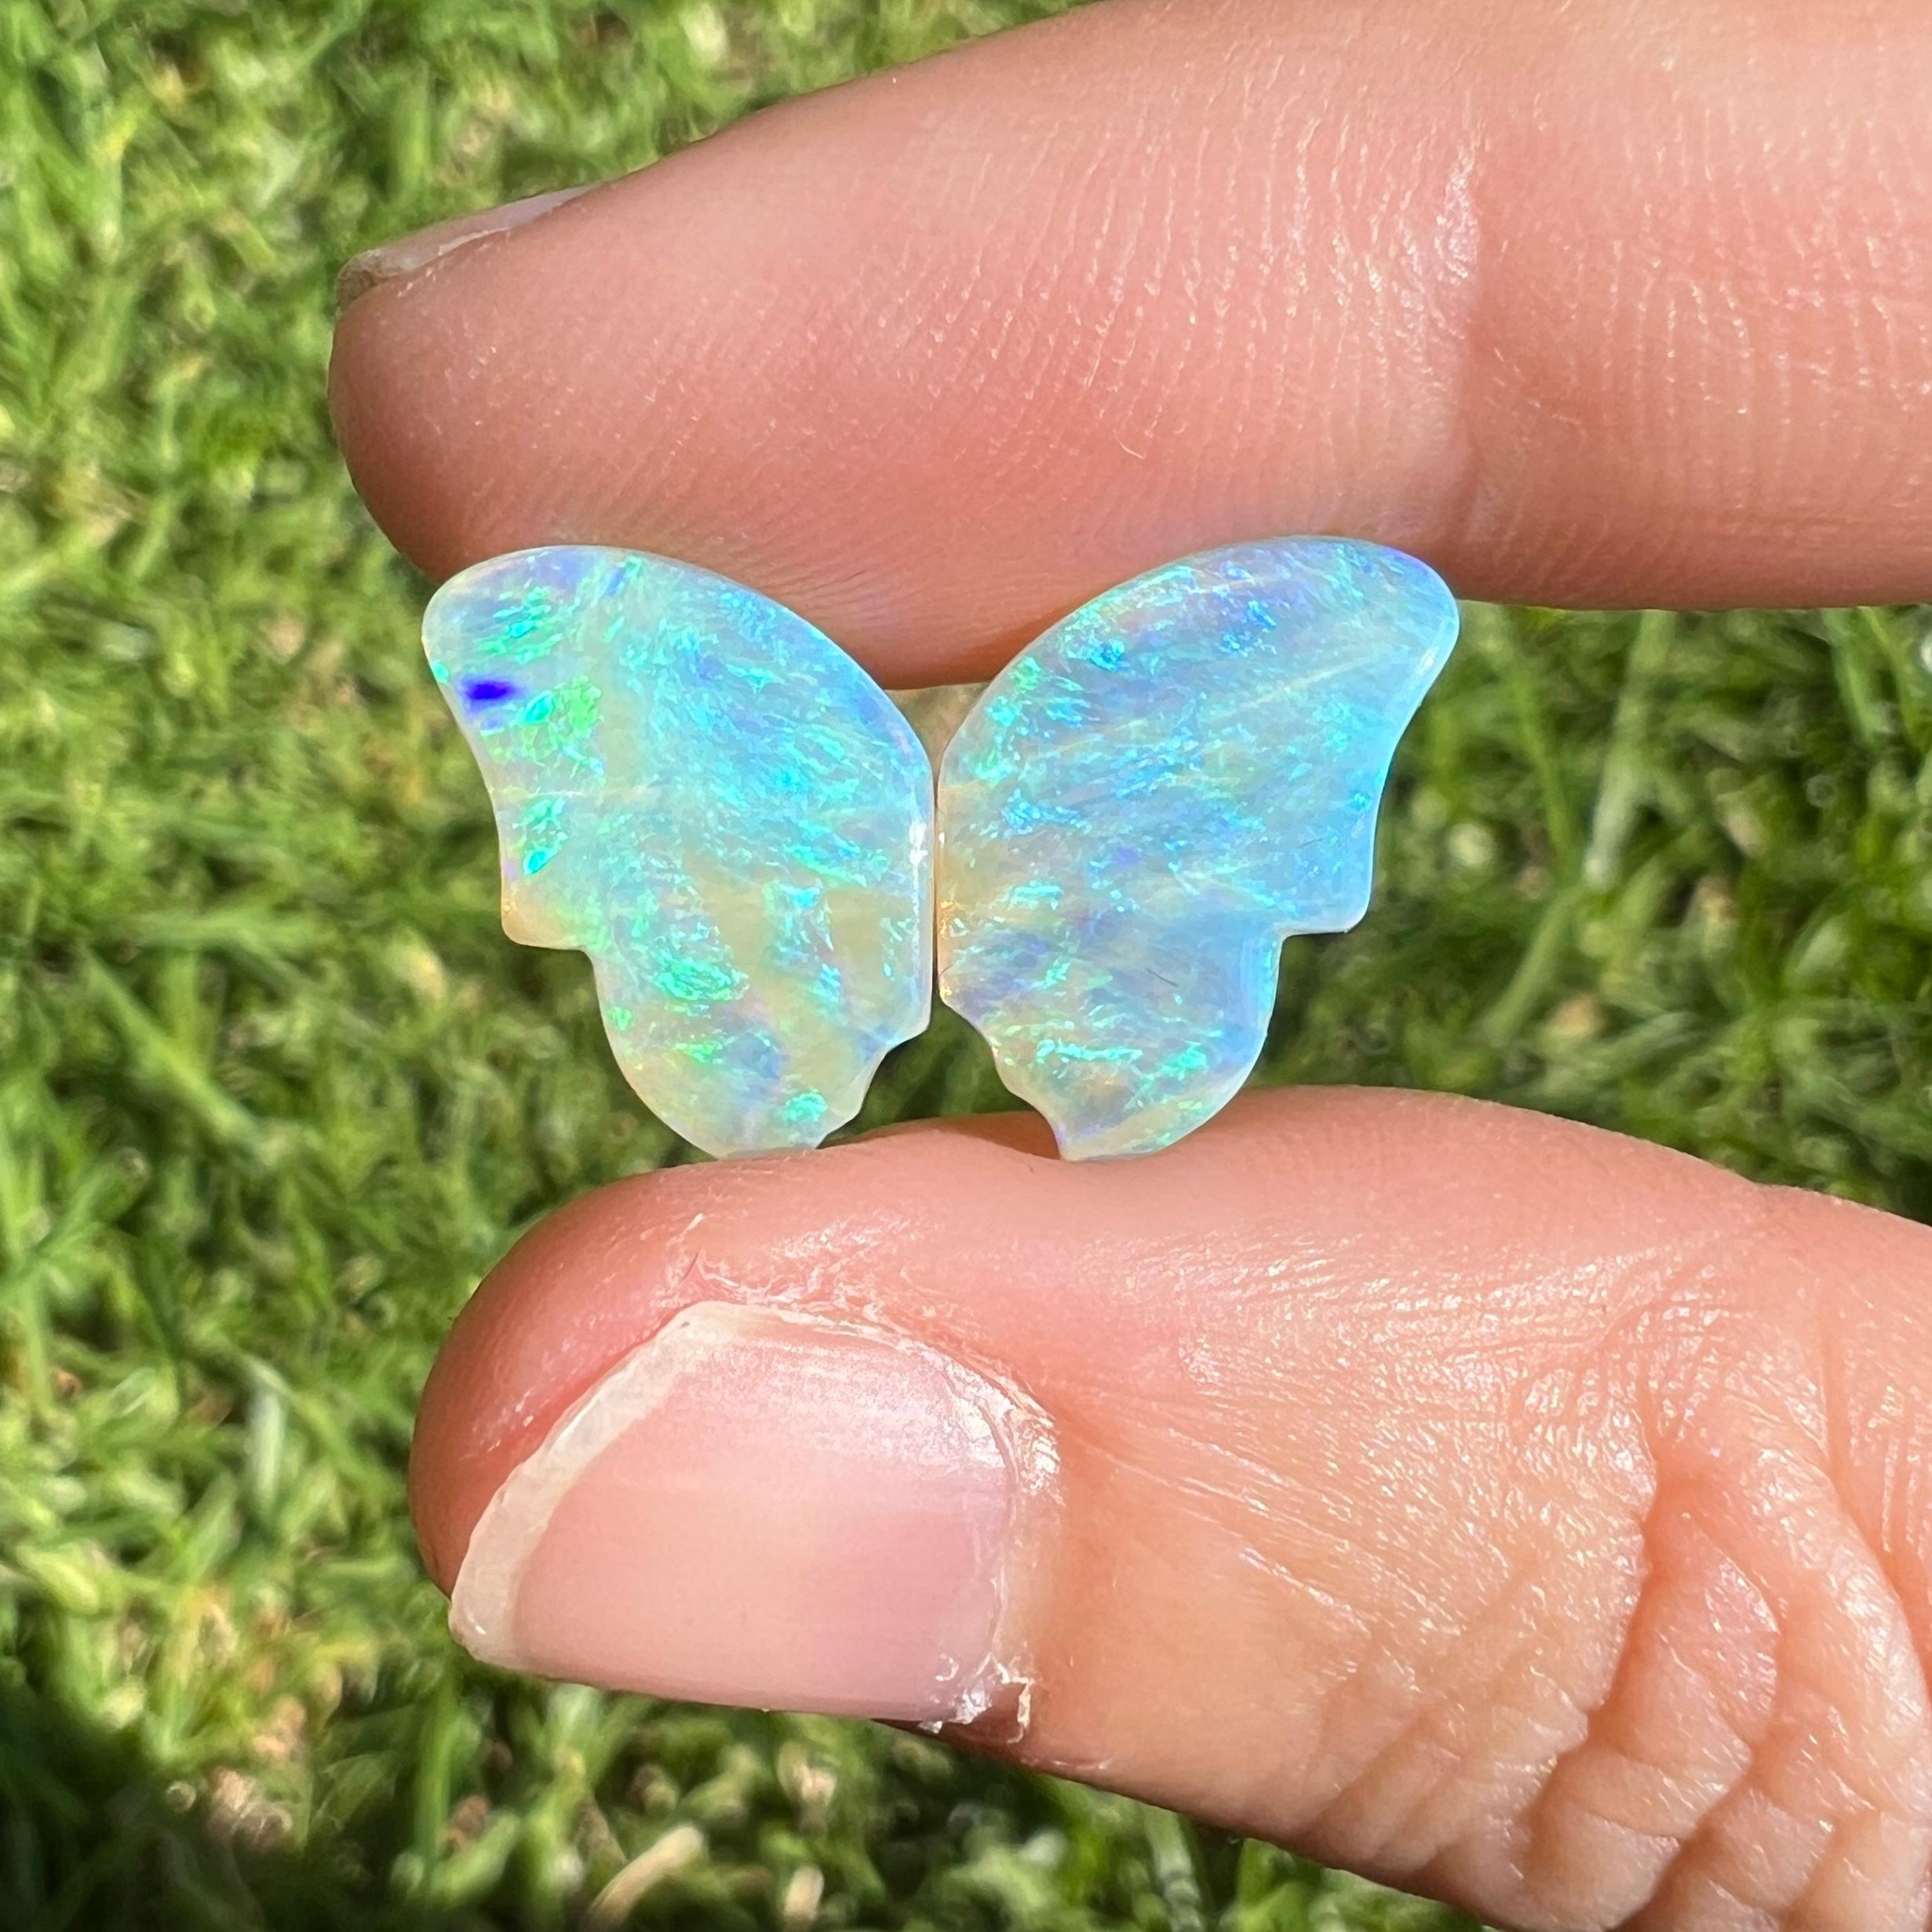 This lovely 5.10 Ct natural Australian crystal opal, carved into a pair of butterfly wings, is a truly exceptional addition to any collection, mined by Sue Cooper herself. Its rarity, coupled with the amazing winged carving, captivates connoisseurs